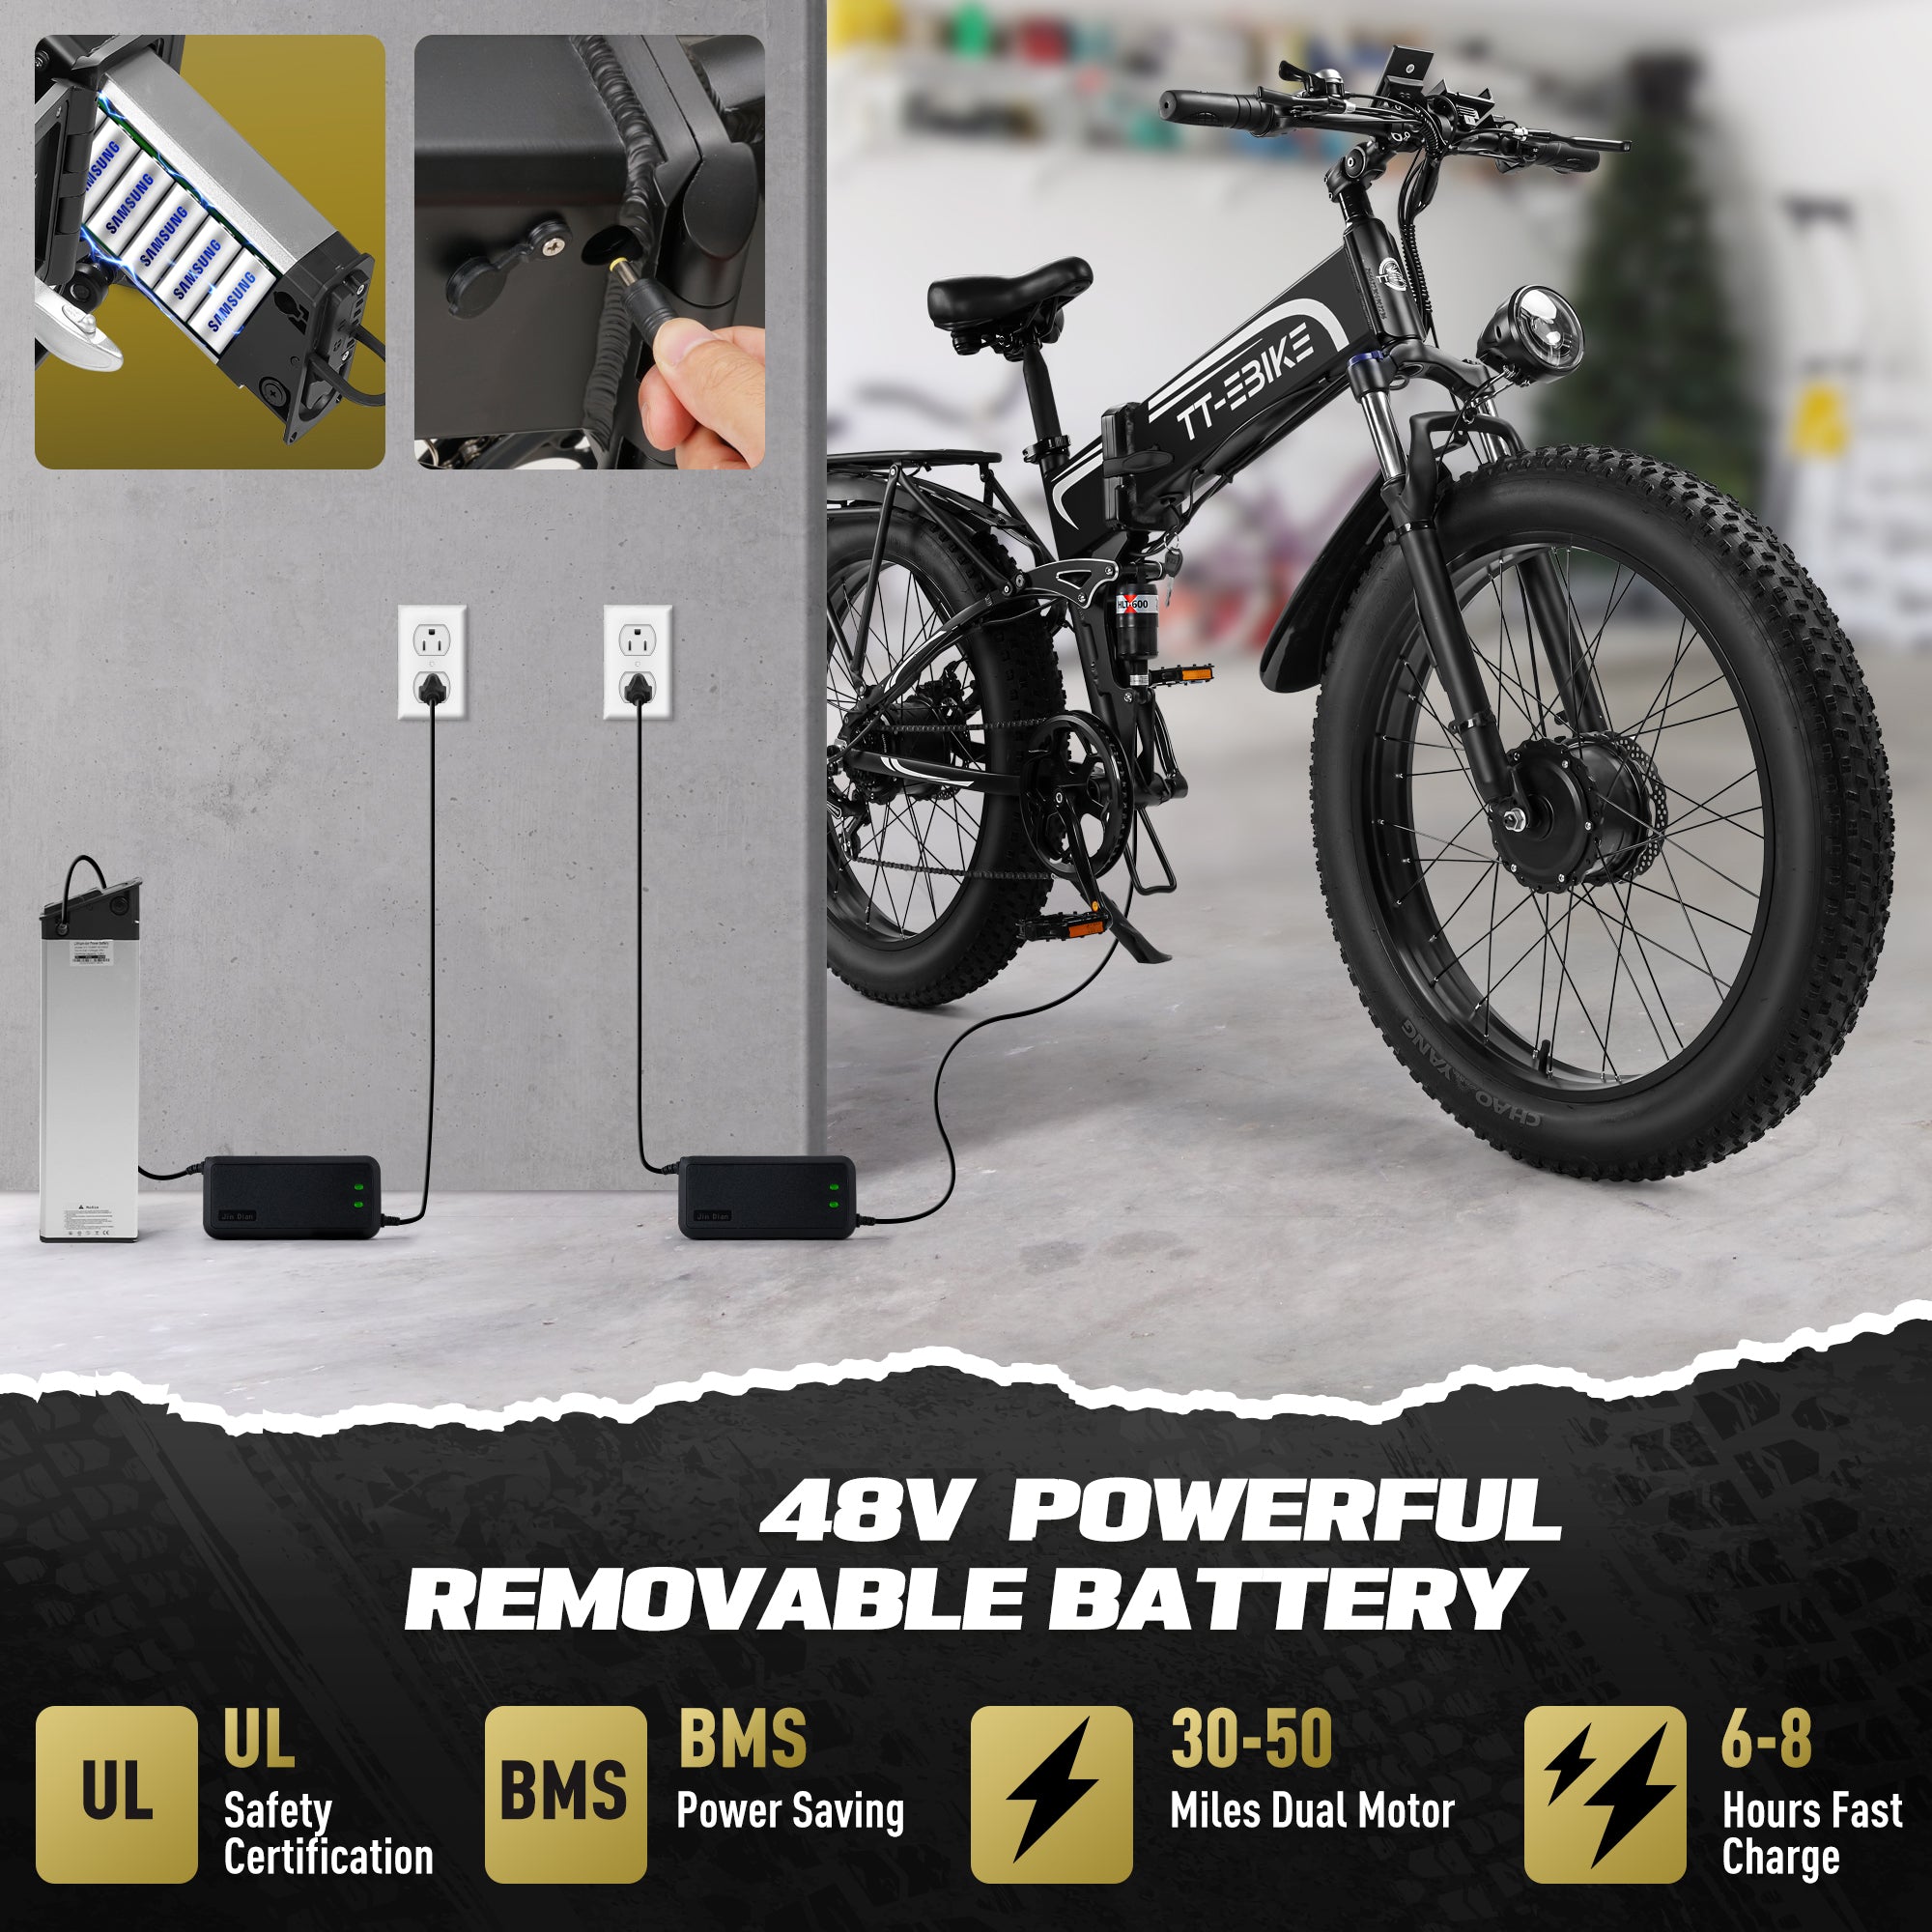 TT-EBIKE Premium Folding Electric Bike with High-Capacity 48V Original Removable Battery - Efficient, Durable, and 1-Year Warranty Included